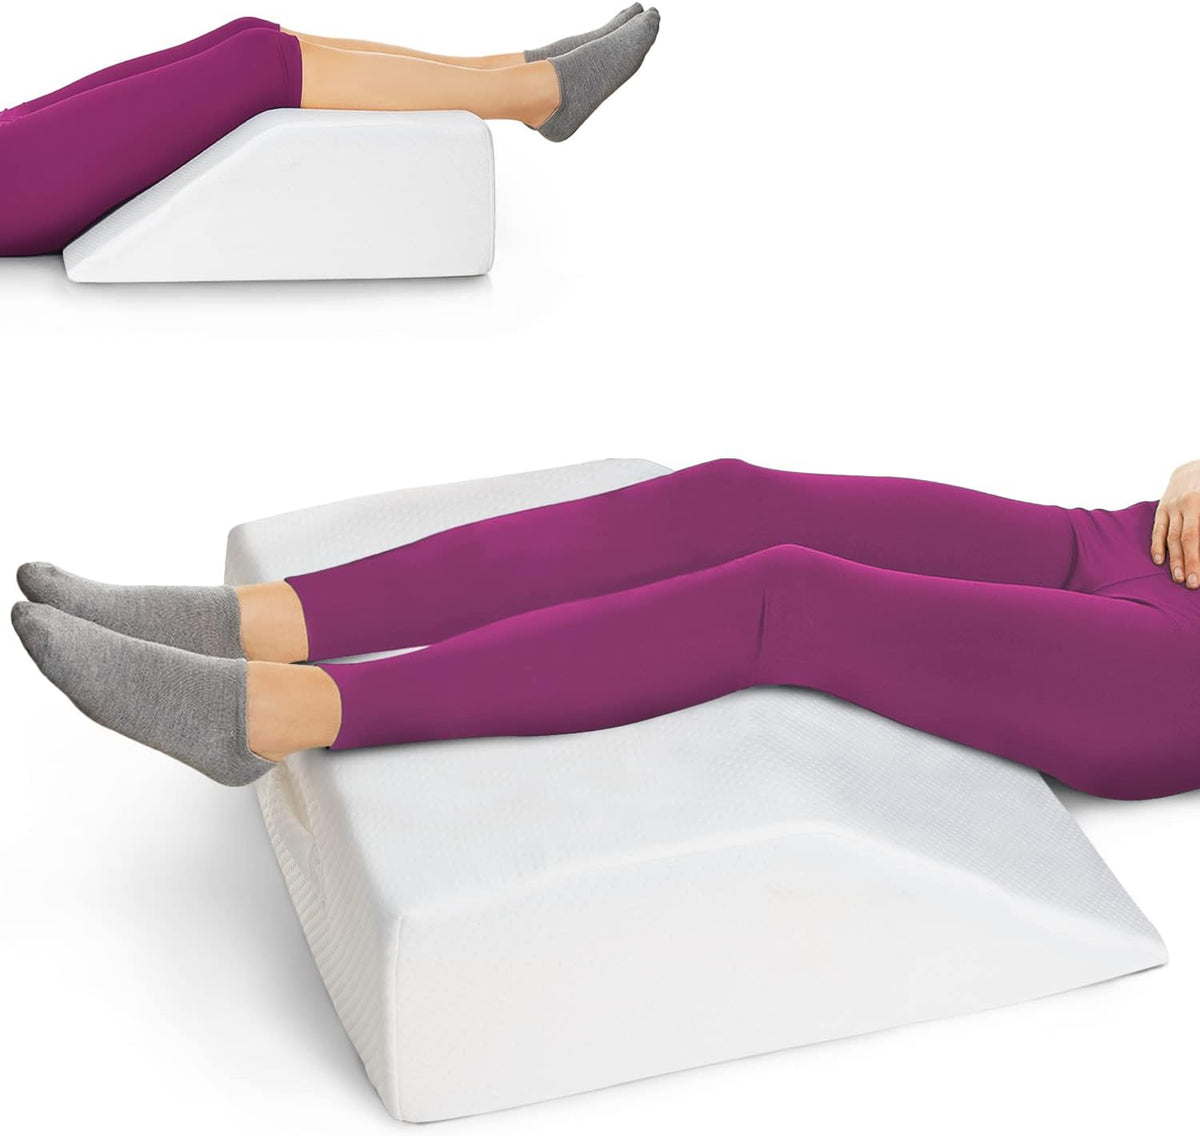 Leg Elevation Pillow - Leg Pillows for Sleeping - Cooling Gel Memory Foam Top, High-Density Leg Rest Elevating Foam Wedge | Relieves and Recovers